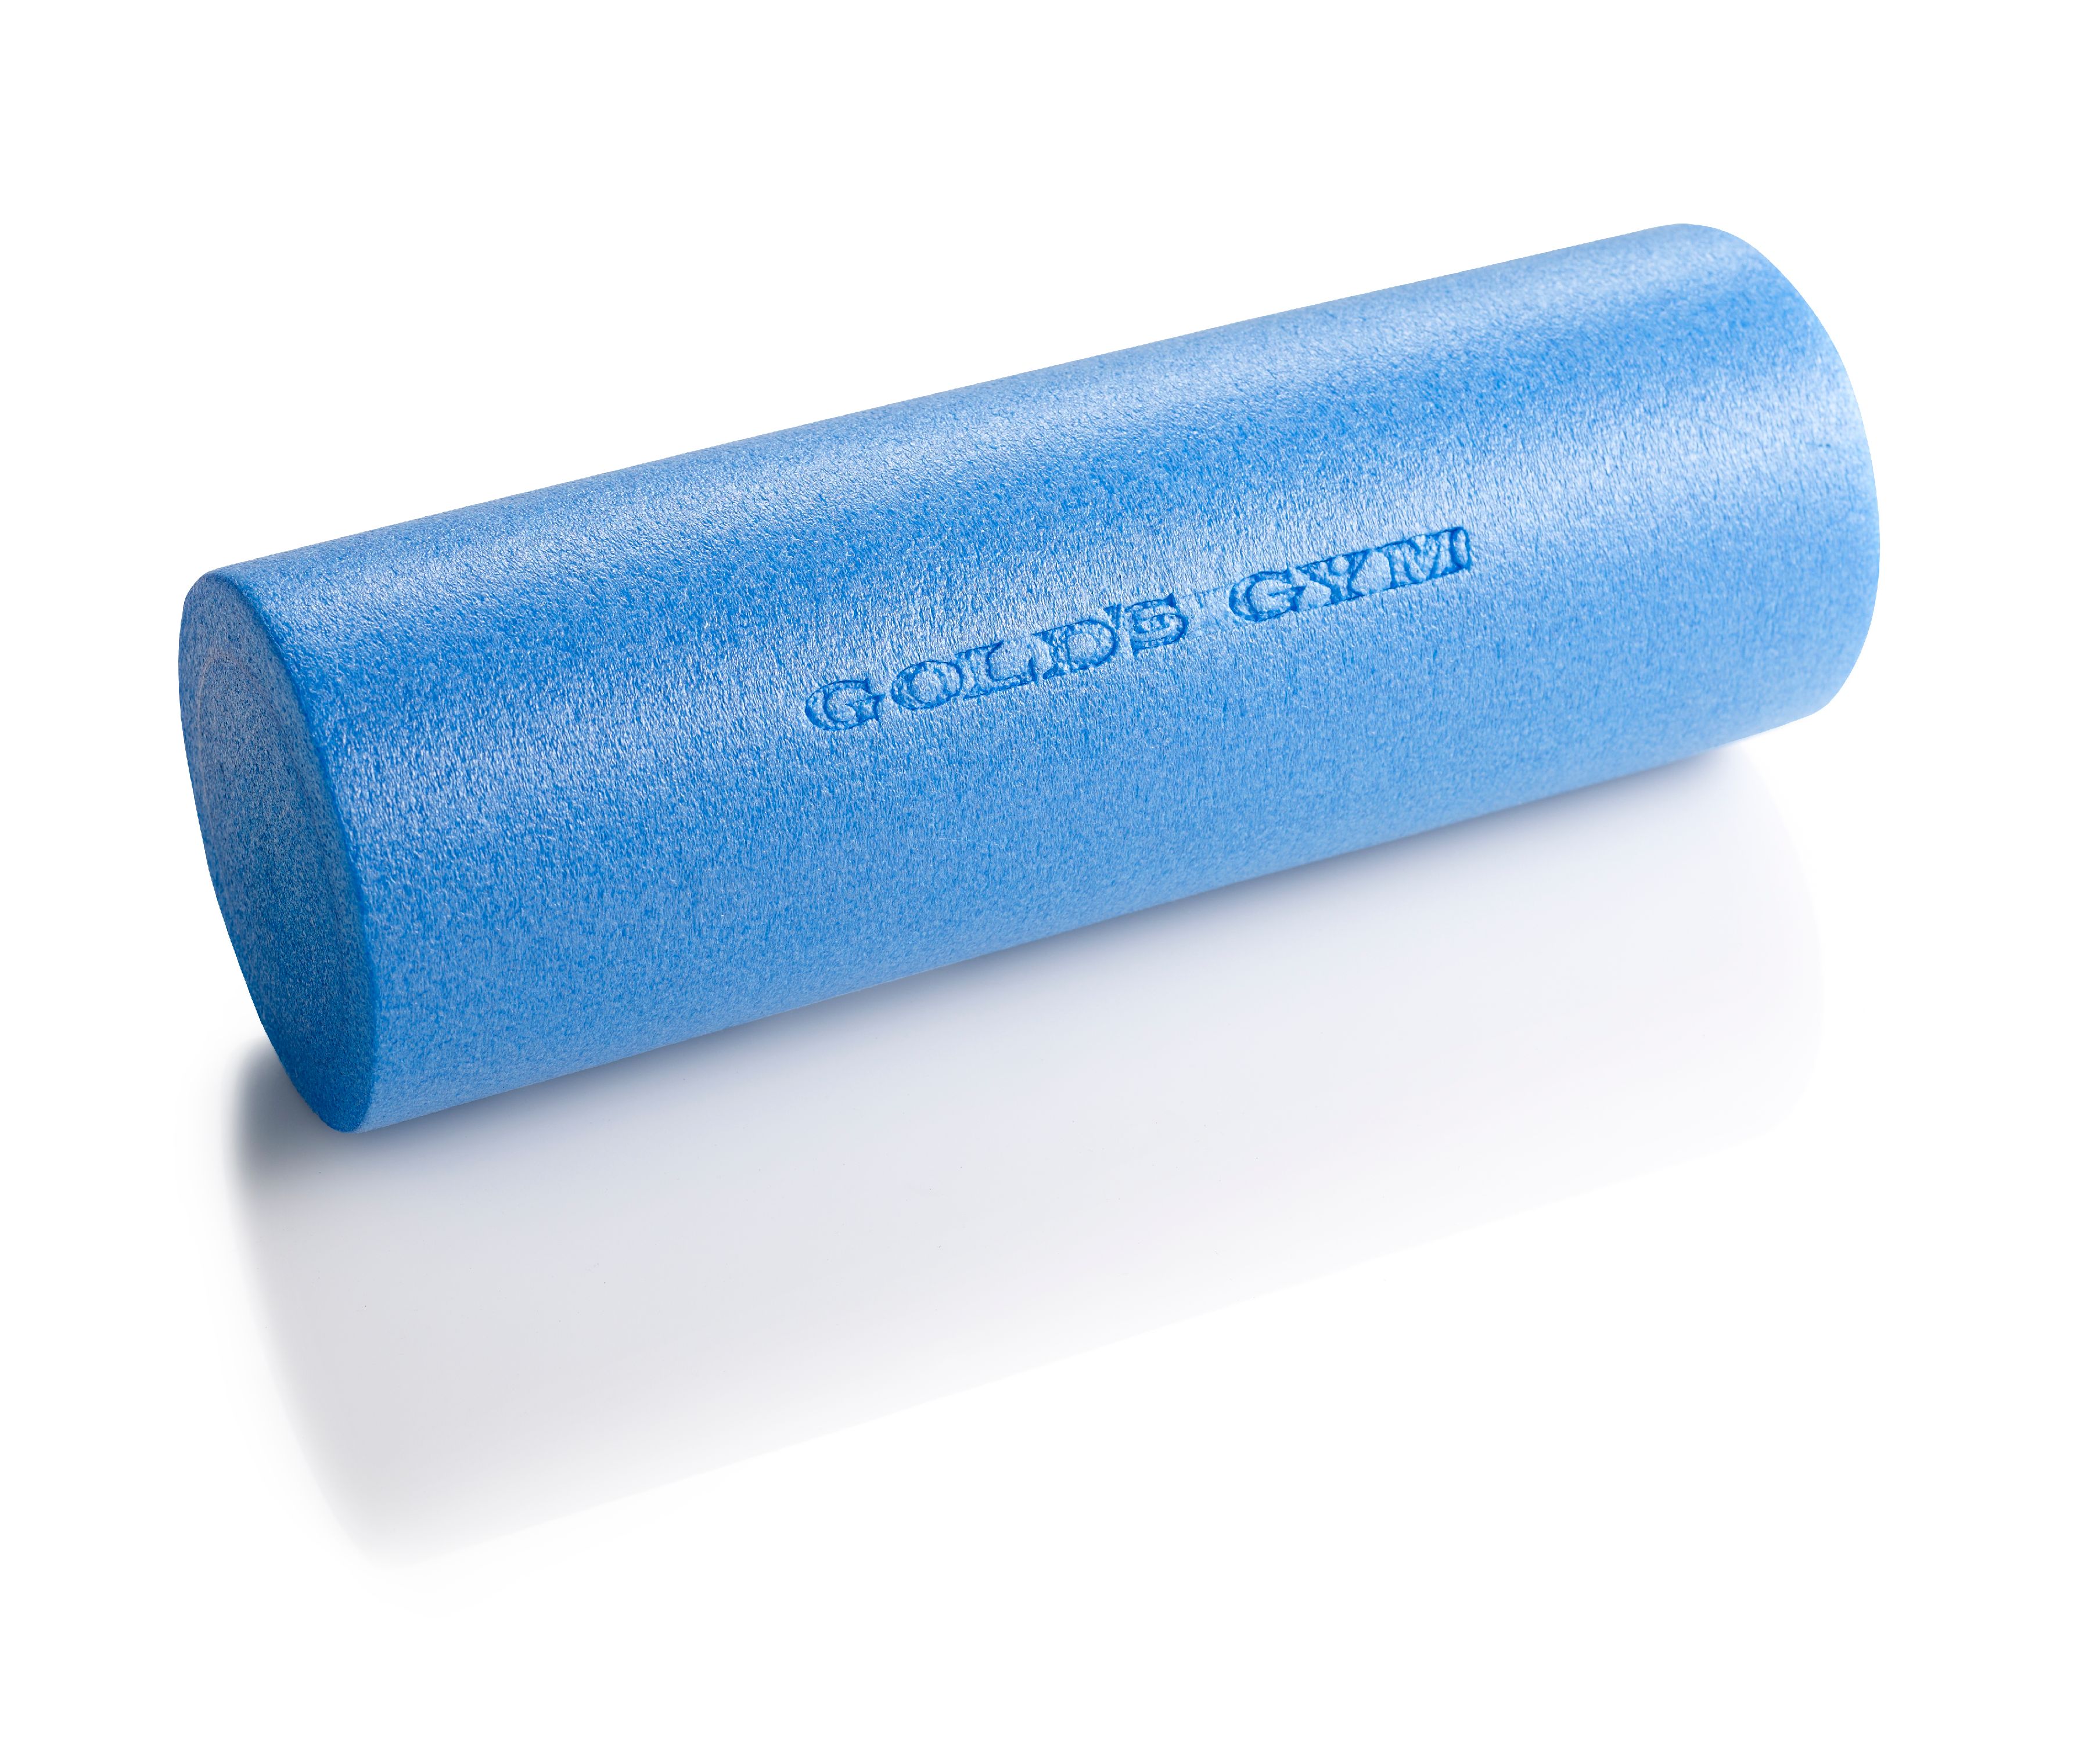 Gold's Gym High Density 18 and 30" Foam Rollers - image 1 of 8